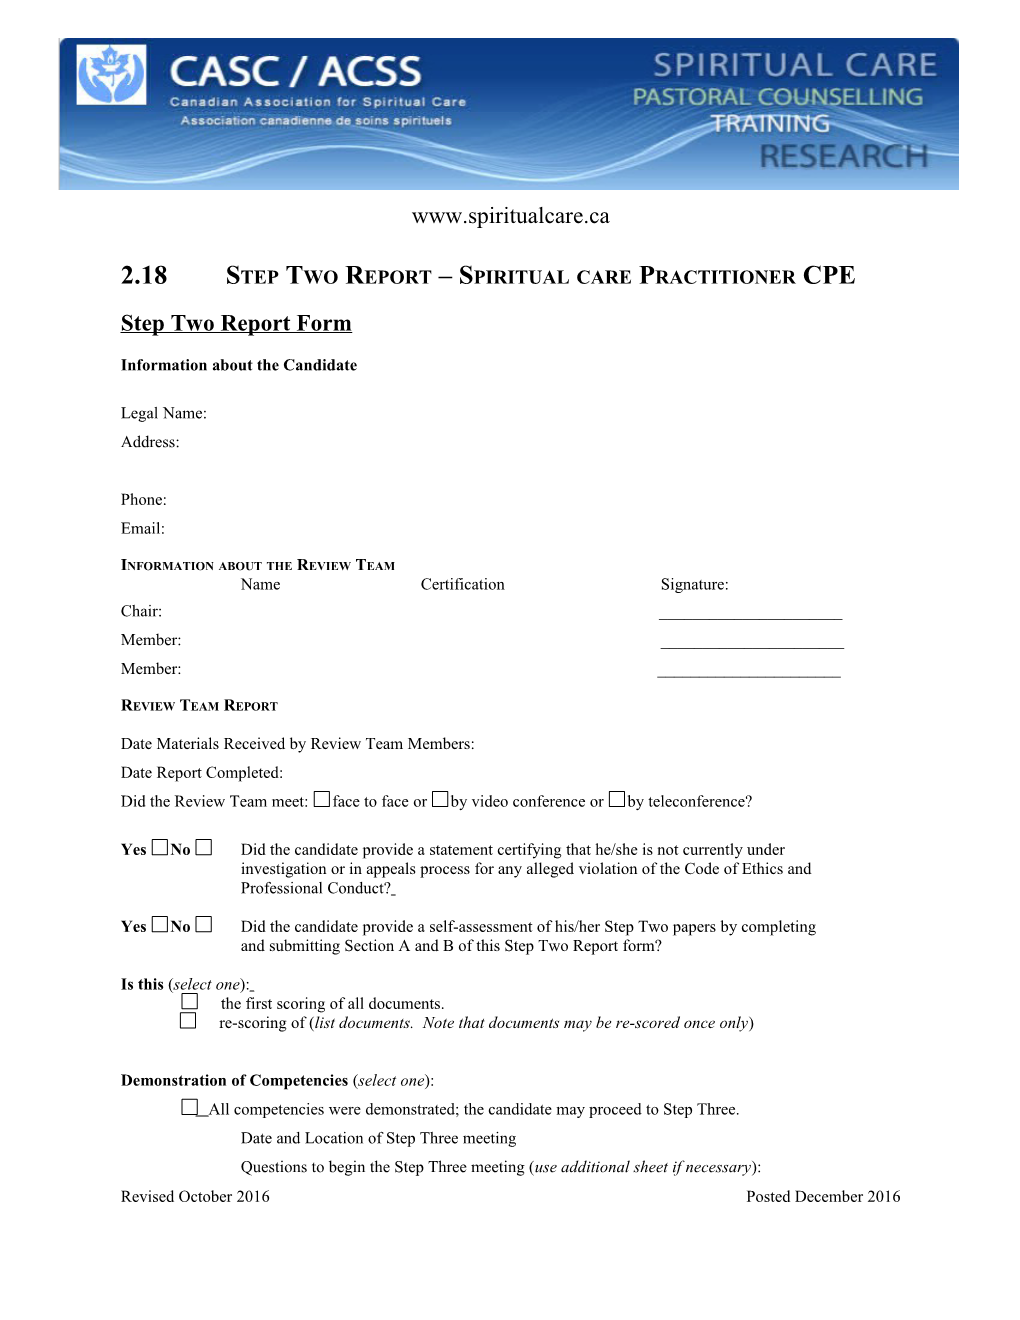 2.18 Step Two Report Spiritual Care Practitioner CPE